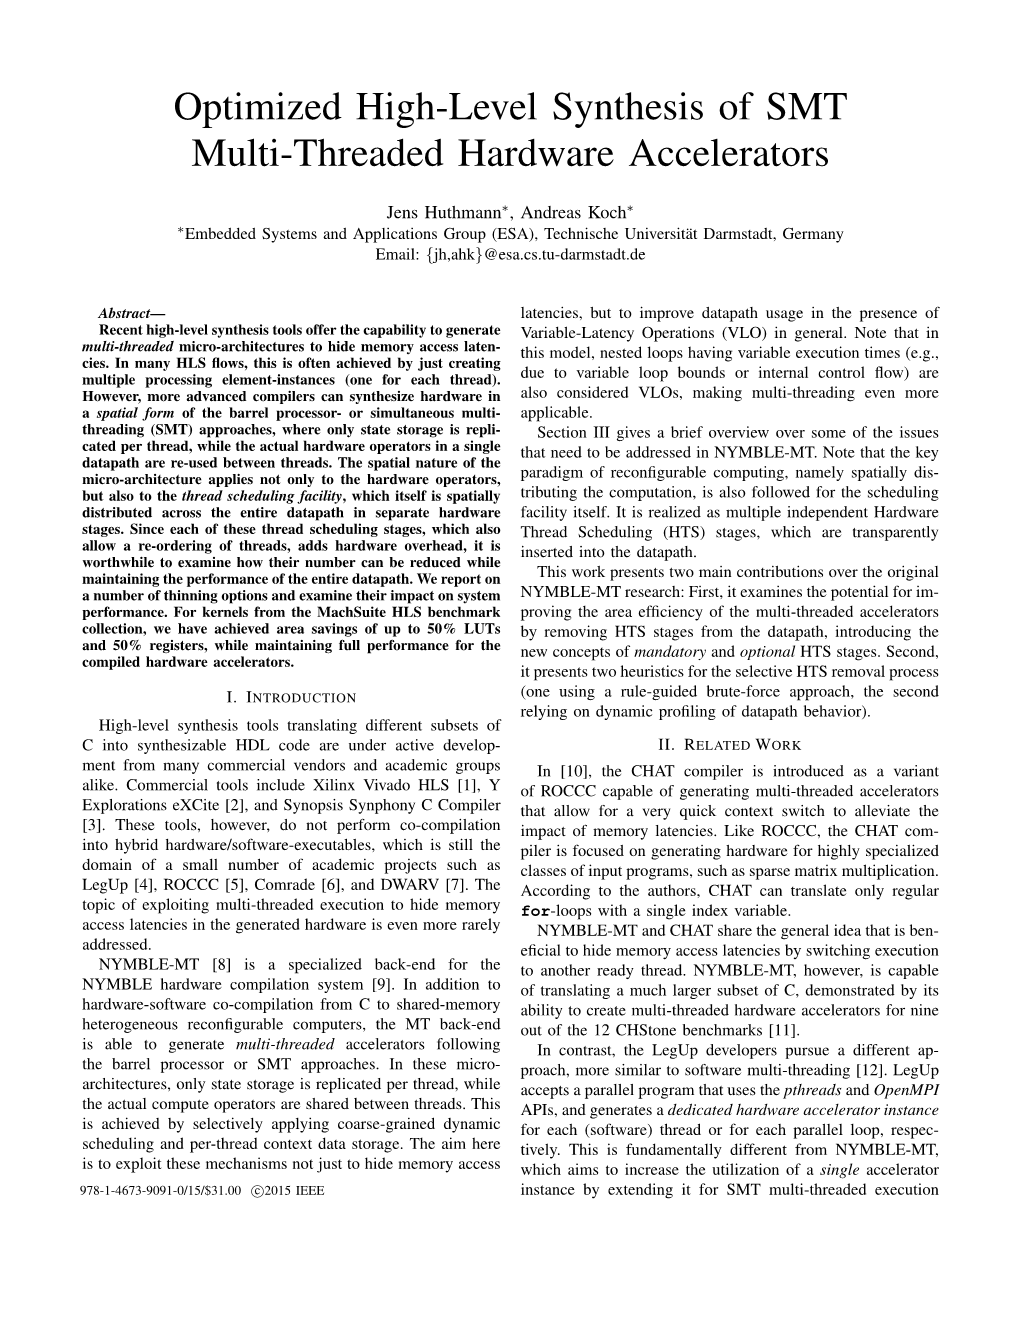 Optimized High-Level Synthesis of SMT Multi-Threaded Hardware Accelerators